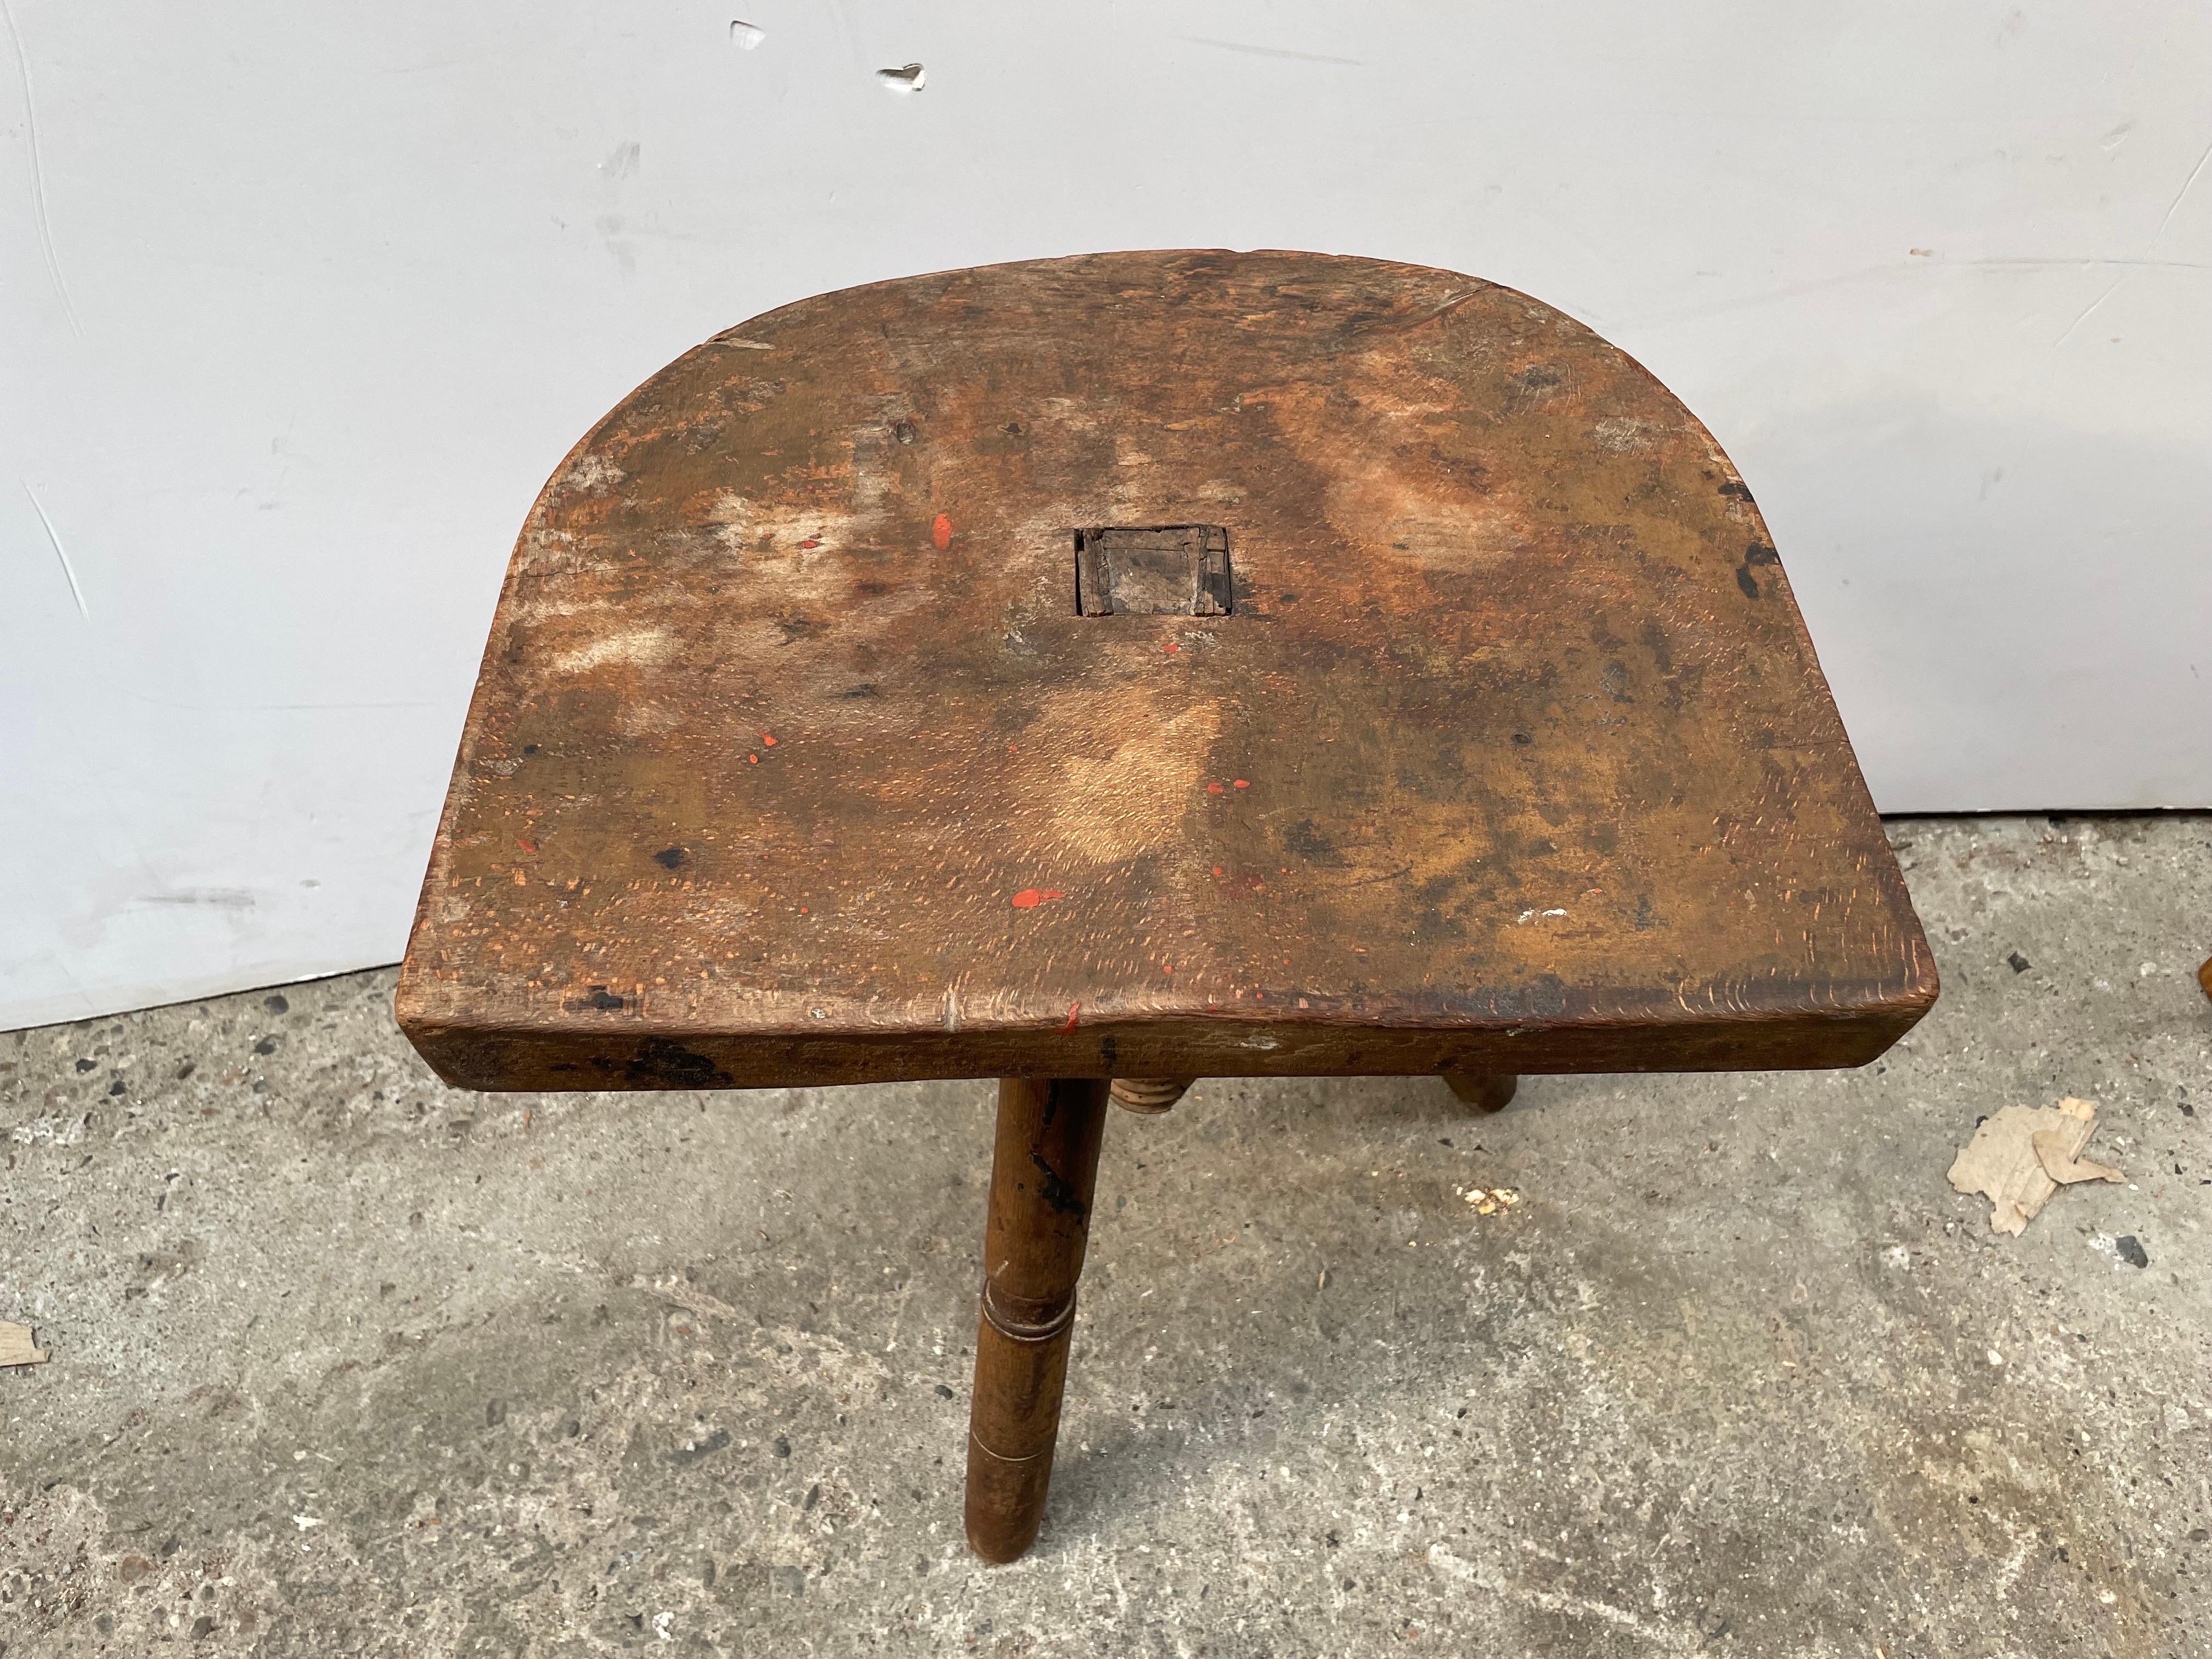 An old stool with a carved seat raised over 3 legs. One of the legs have been replaced with a piece of wood. It is truly one of a kind piece of antique furniture.